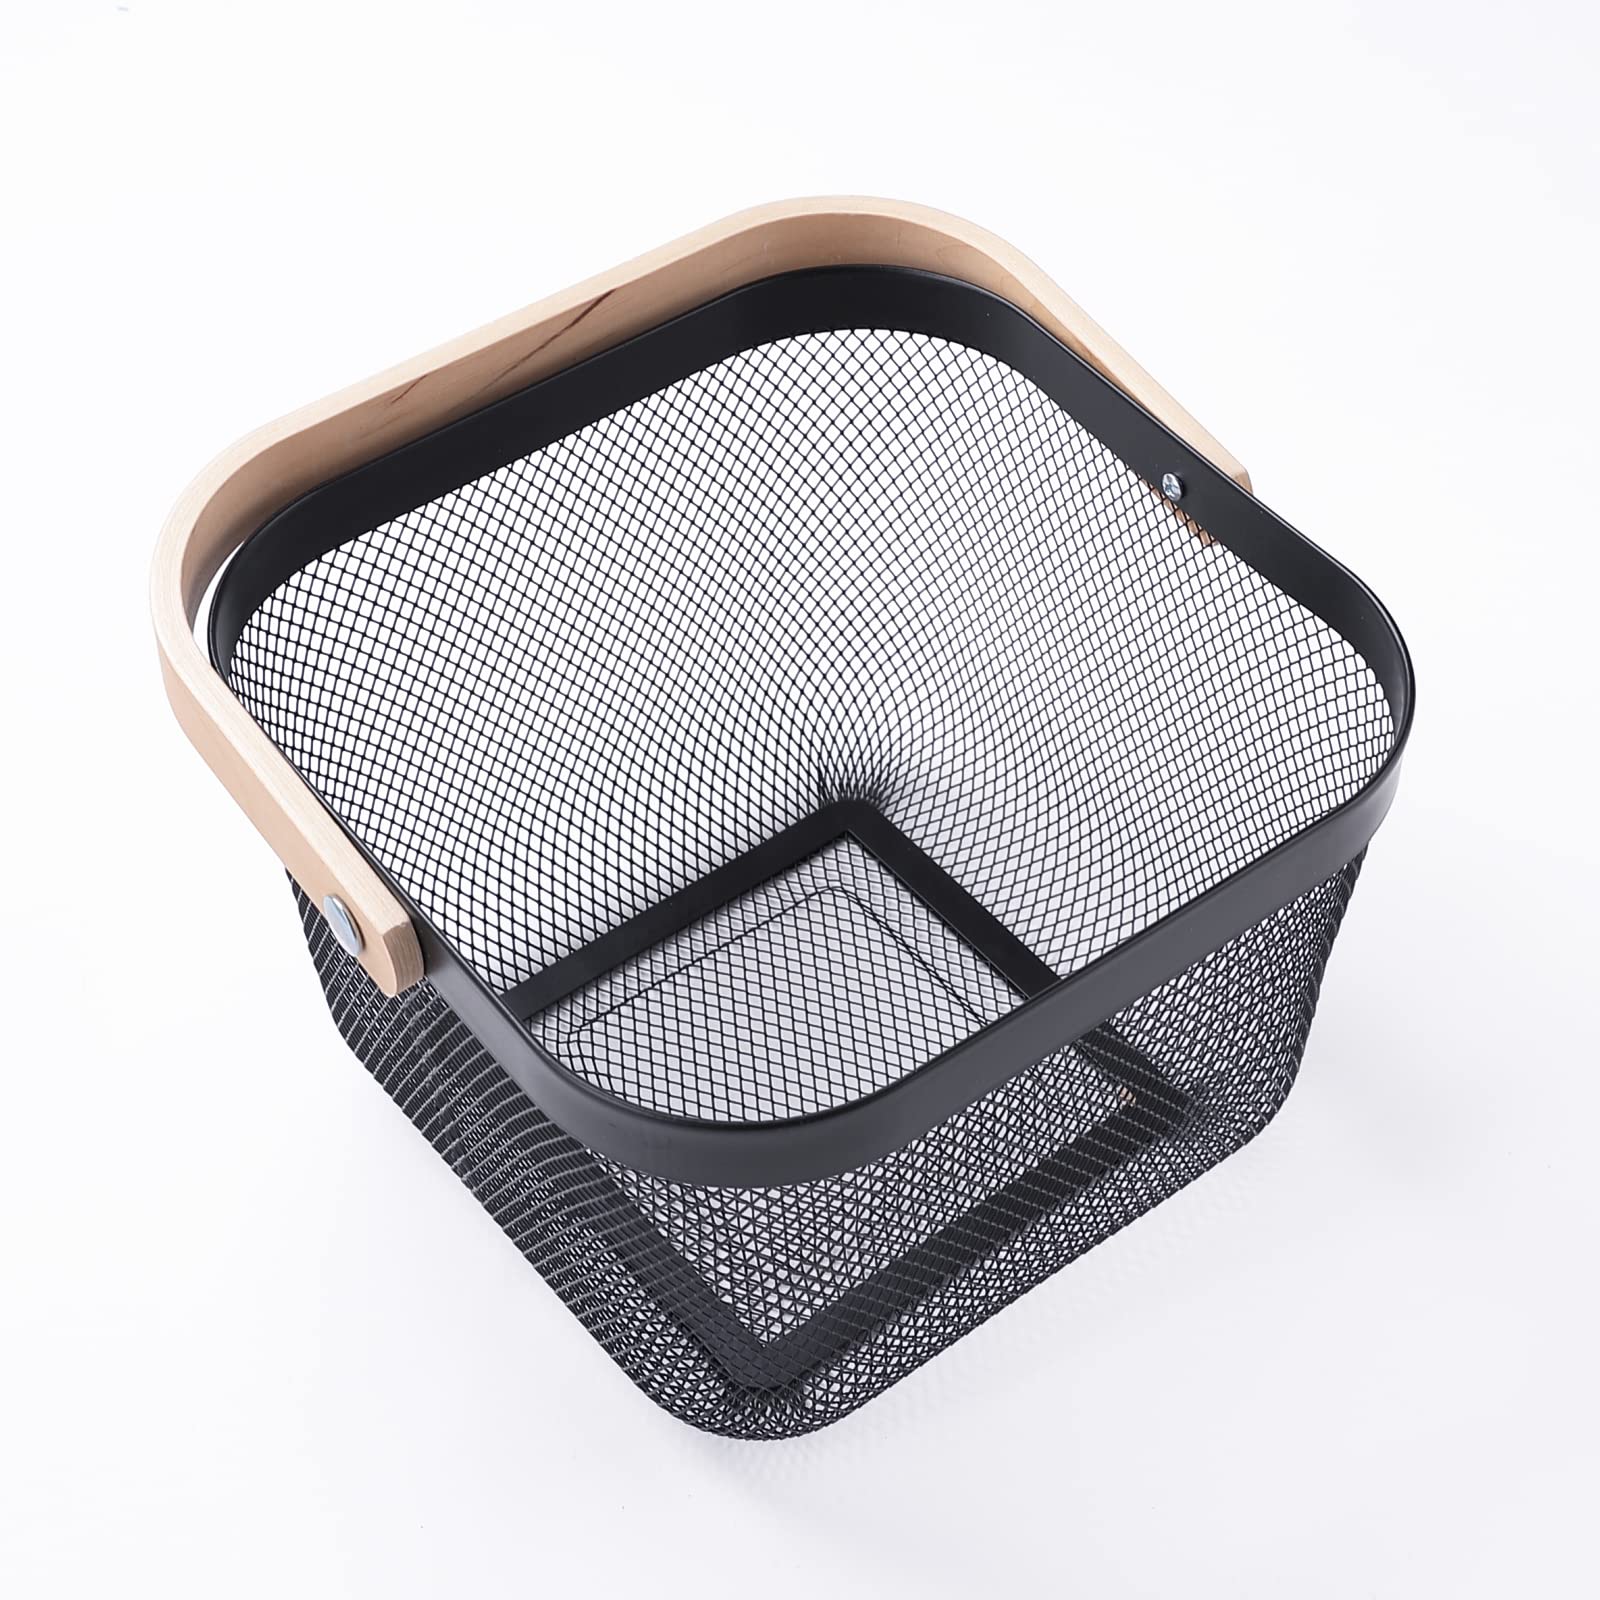 Metal Mesh Storage Basket with Wooden Handle | Ideal for Storage, Shopping, Picnics and More (Black)